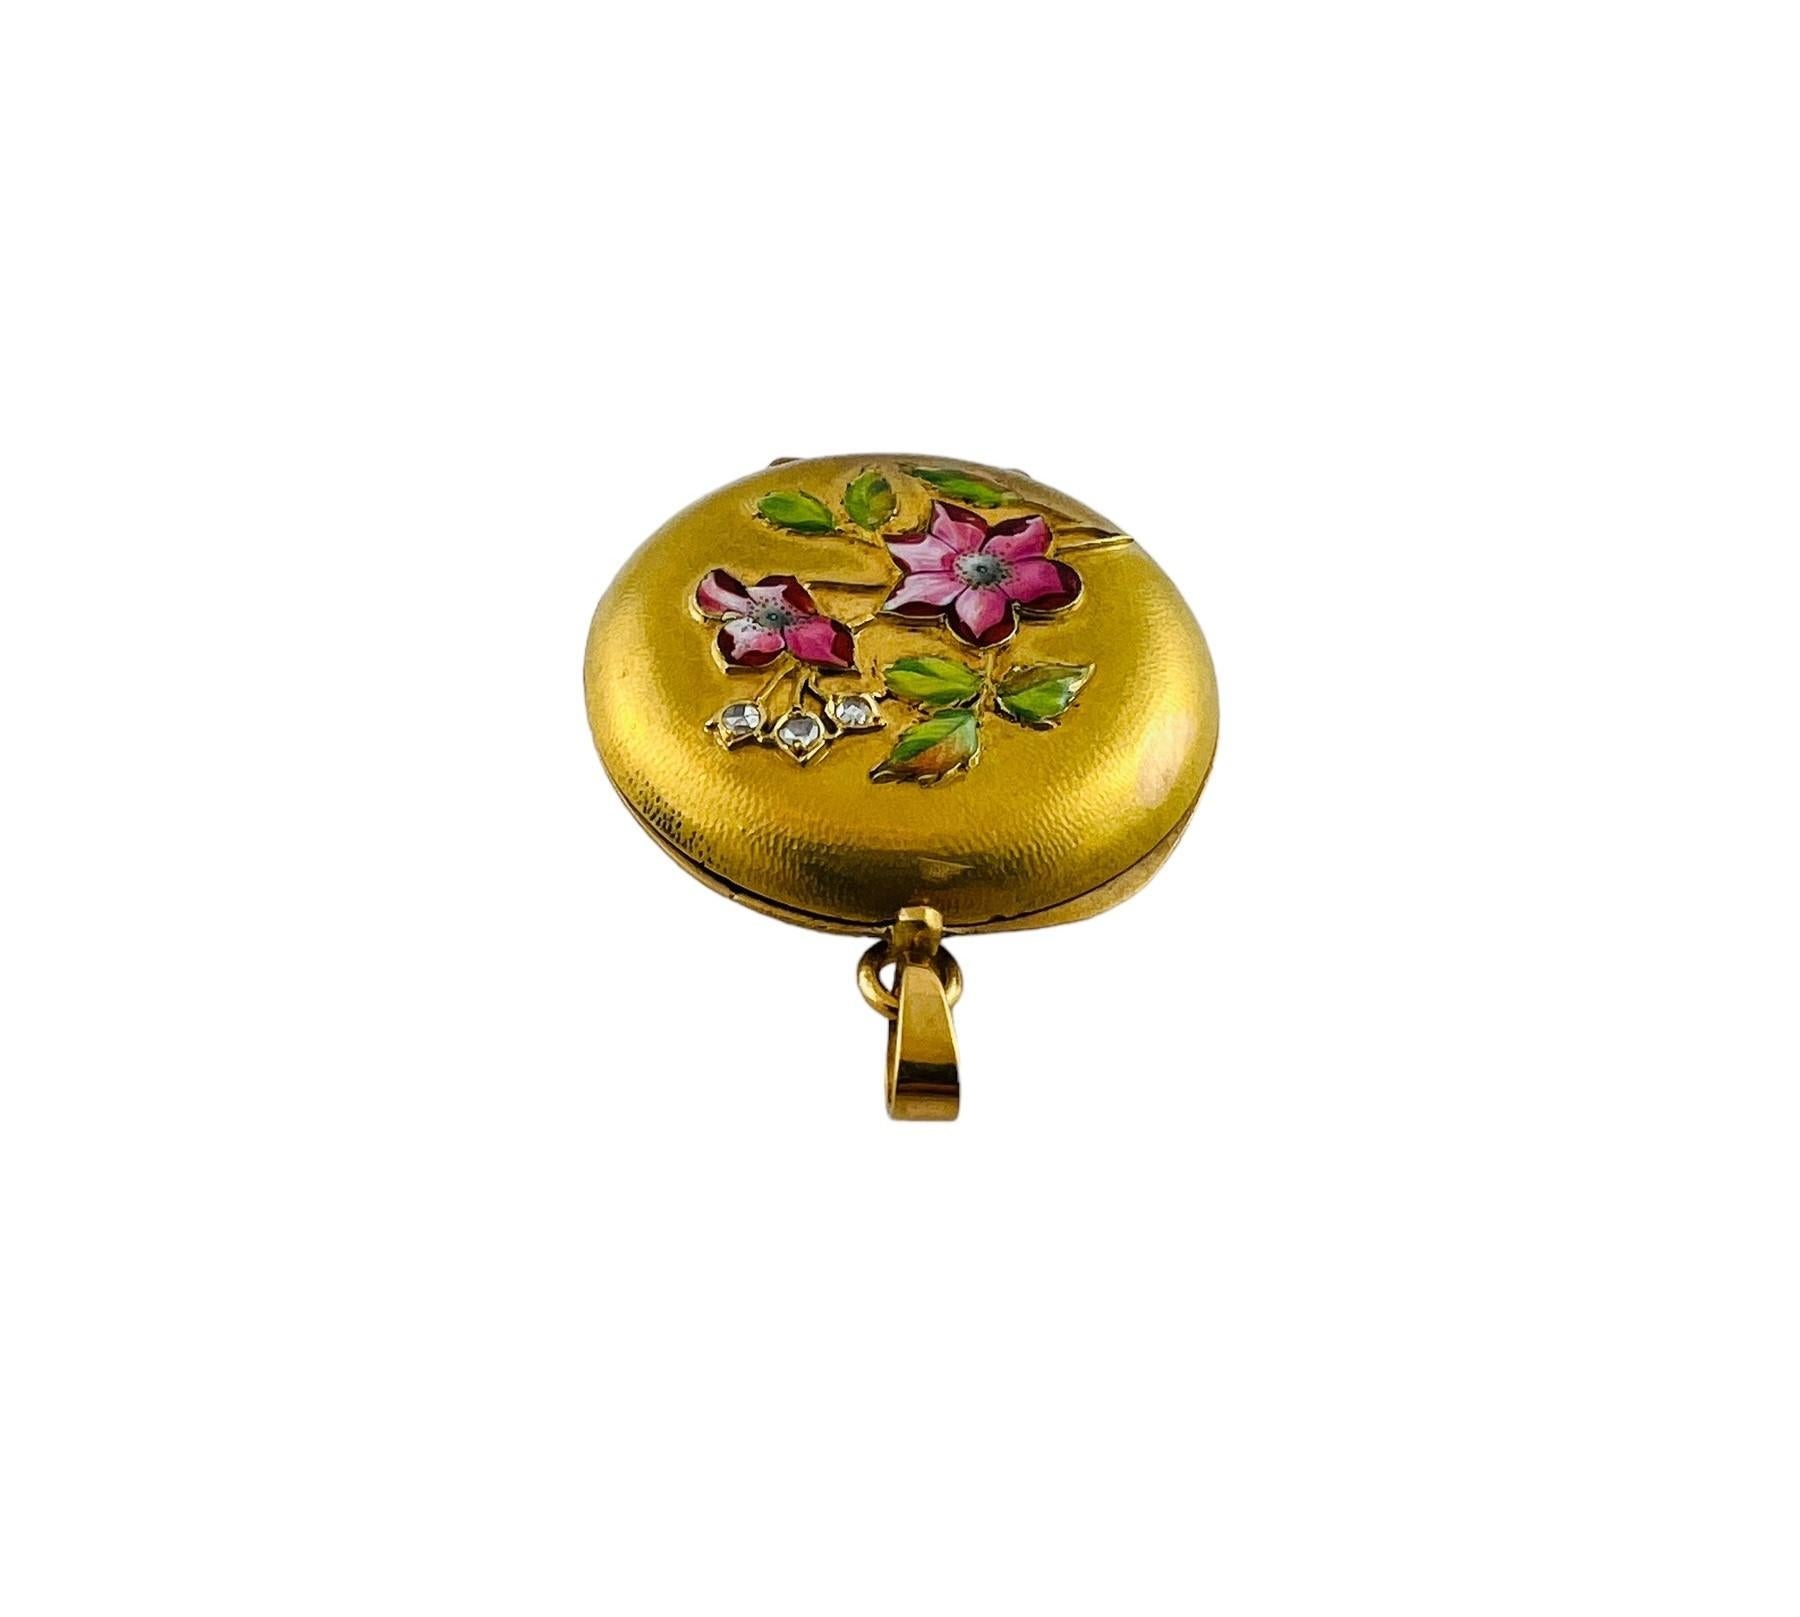 18K Yellow Gold and Enamel Round Locket with Floral Design #16549 For Sale 4